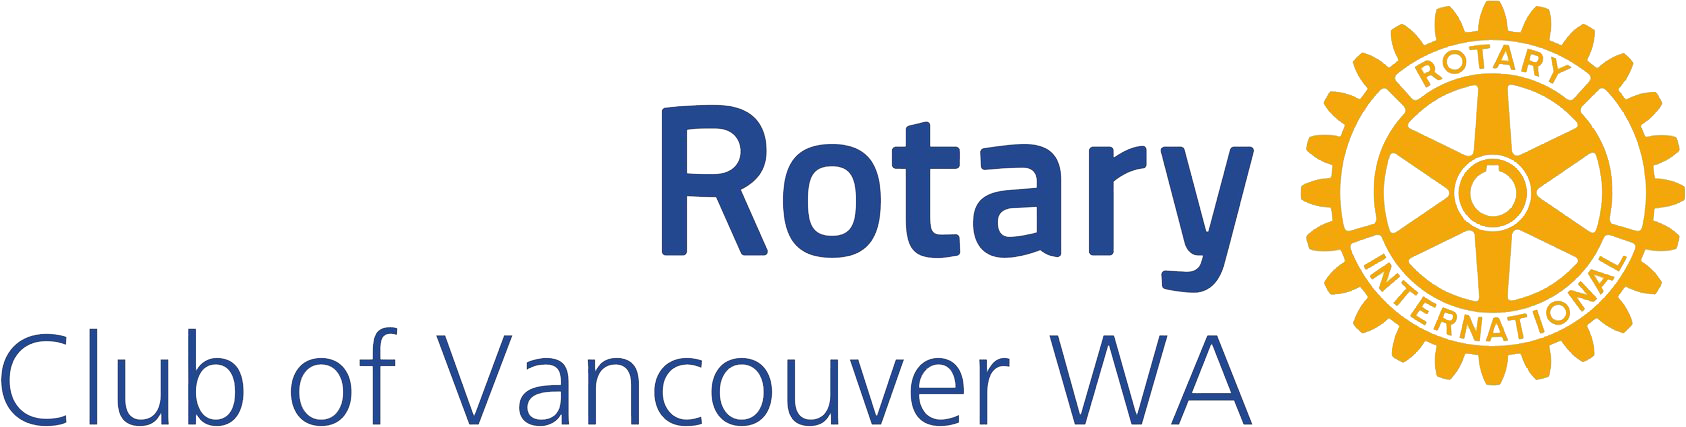 Rotary Club of Vancouver